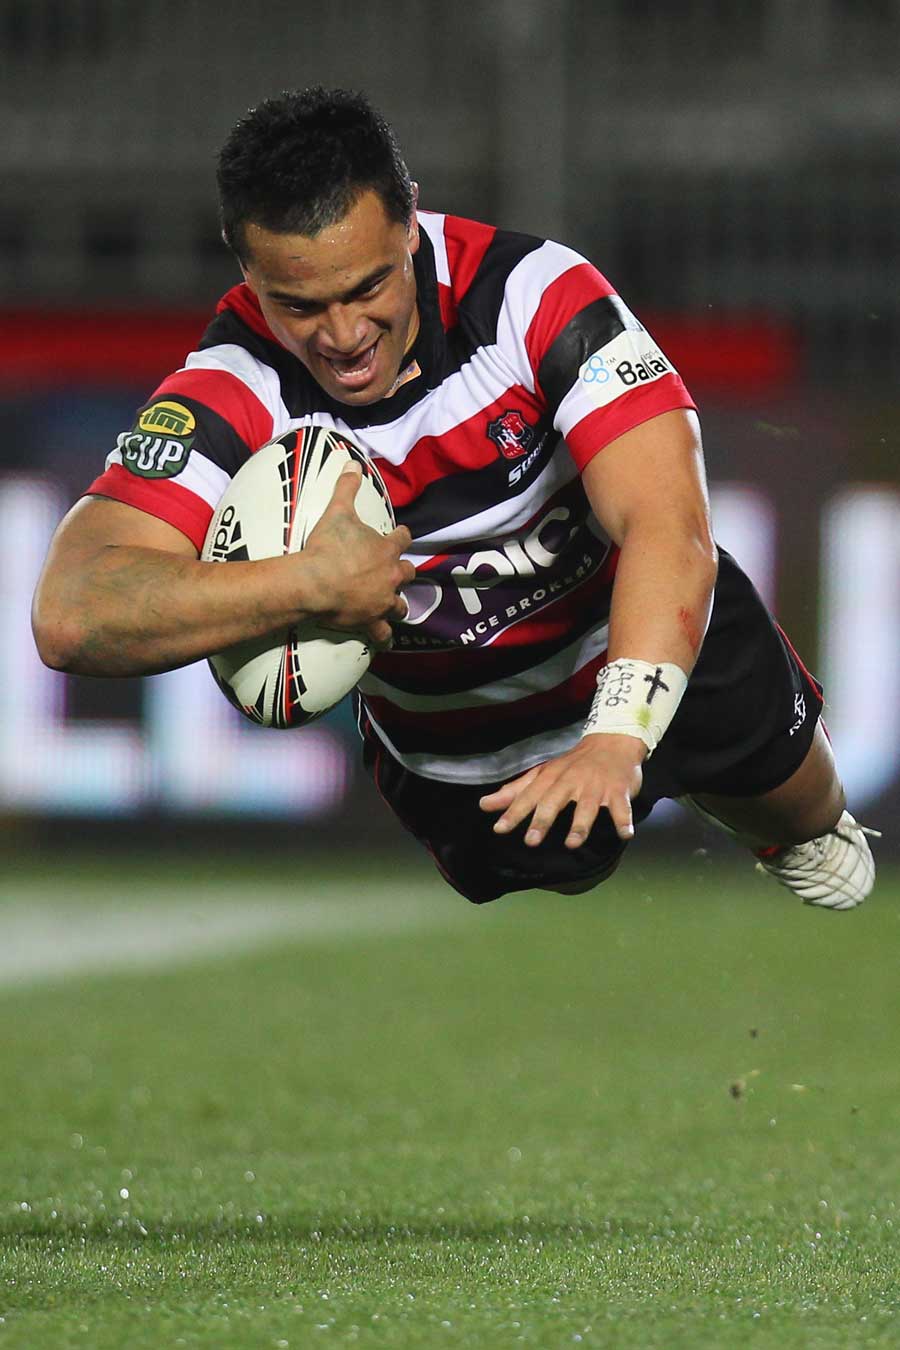 Counties Manukau's Sherwin Stowers scores a try